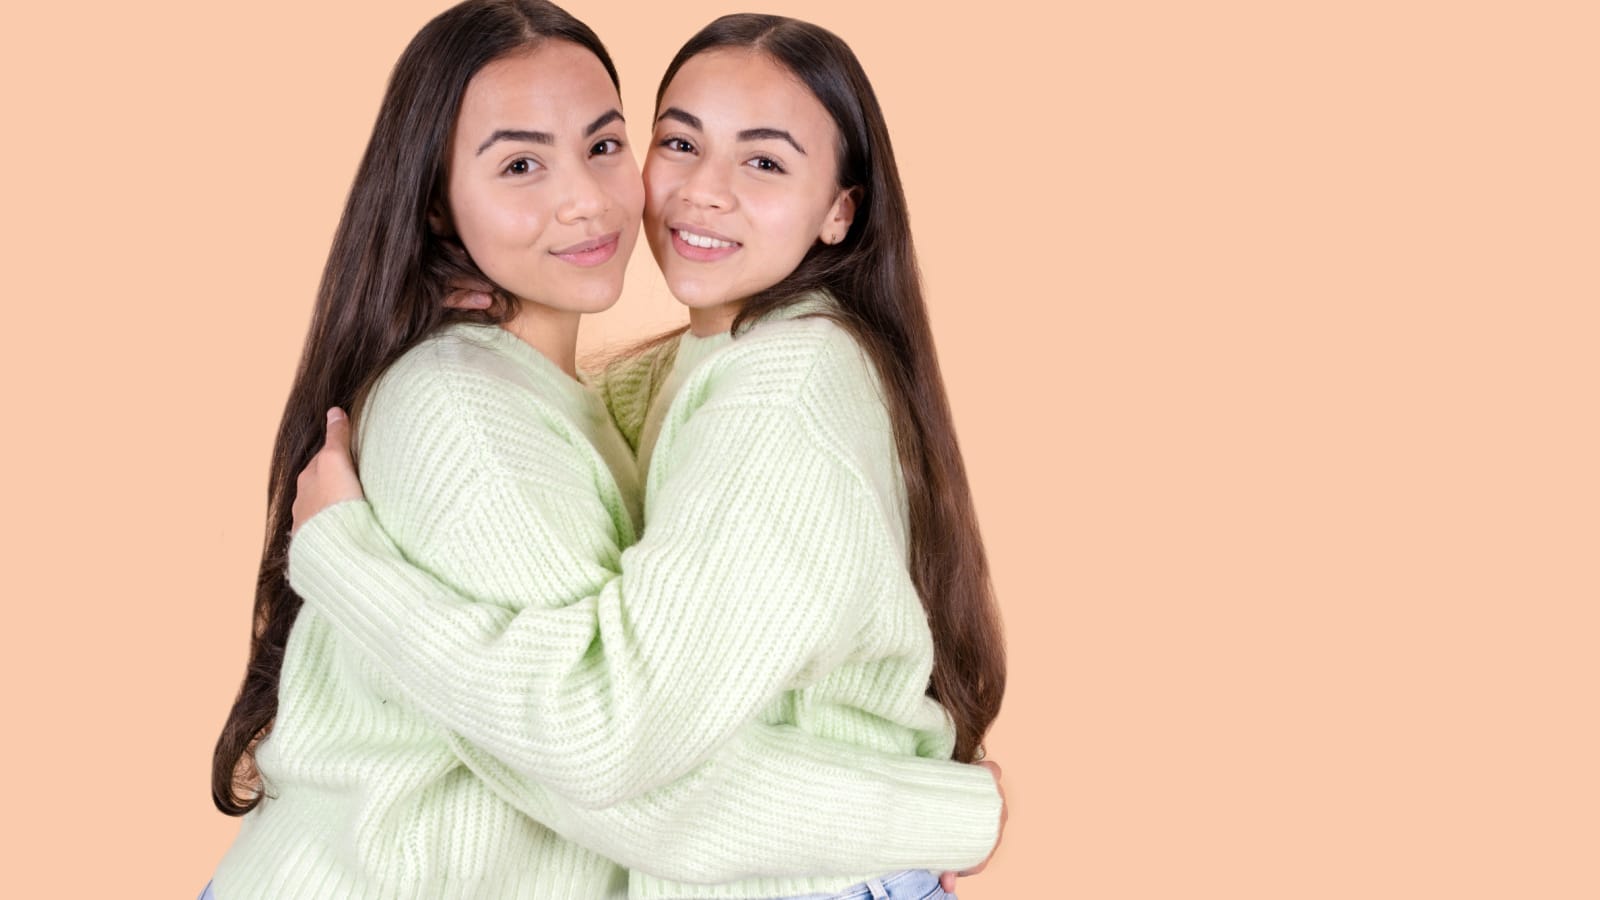 concept of twin sisters embracing. Family relationships, portrait of twin sisters.